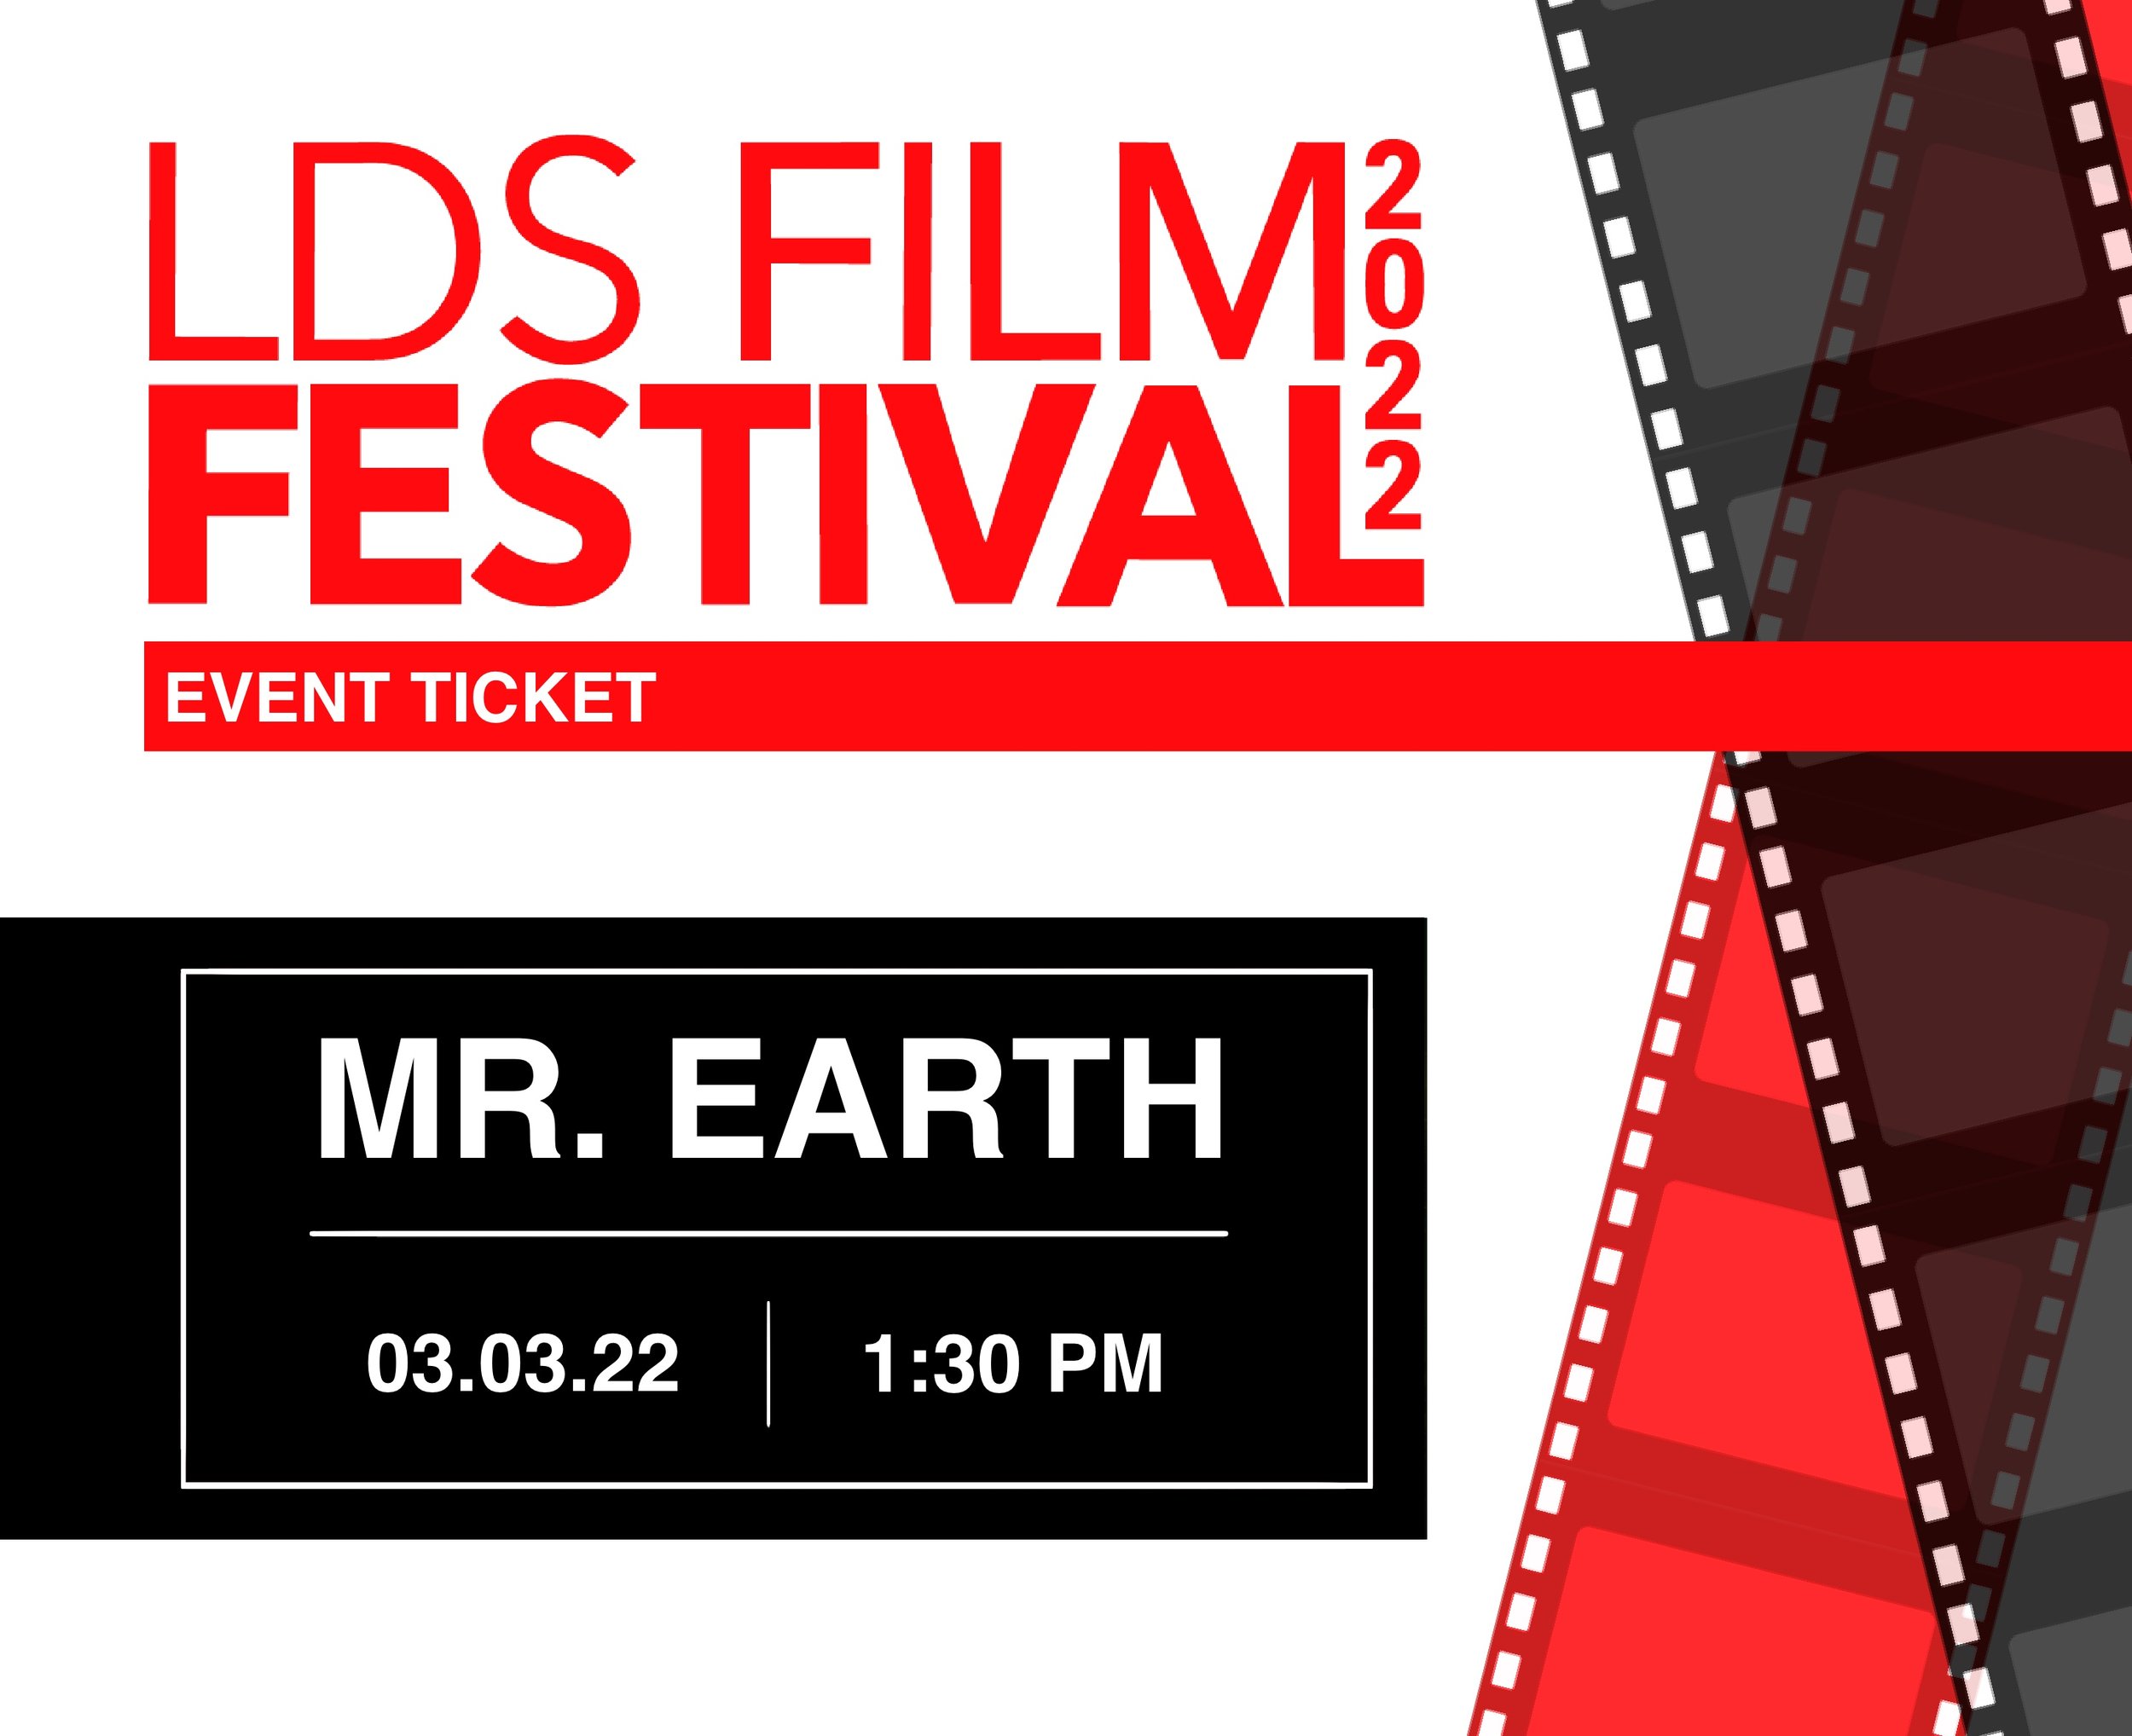 Mr. Earth 03.03.22 | 1:30 PM Clarke Grand Theatre - An ordinary earthling is captured at random and taken to a mysterious planet to stand trial for the fate of planet earth.Q&A with filmmakers 